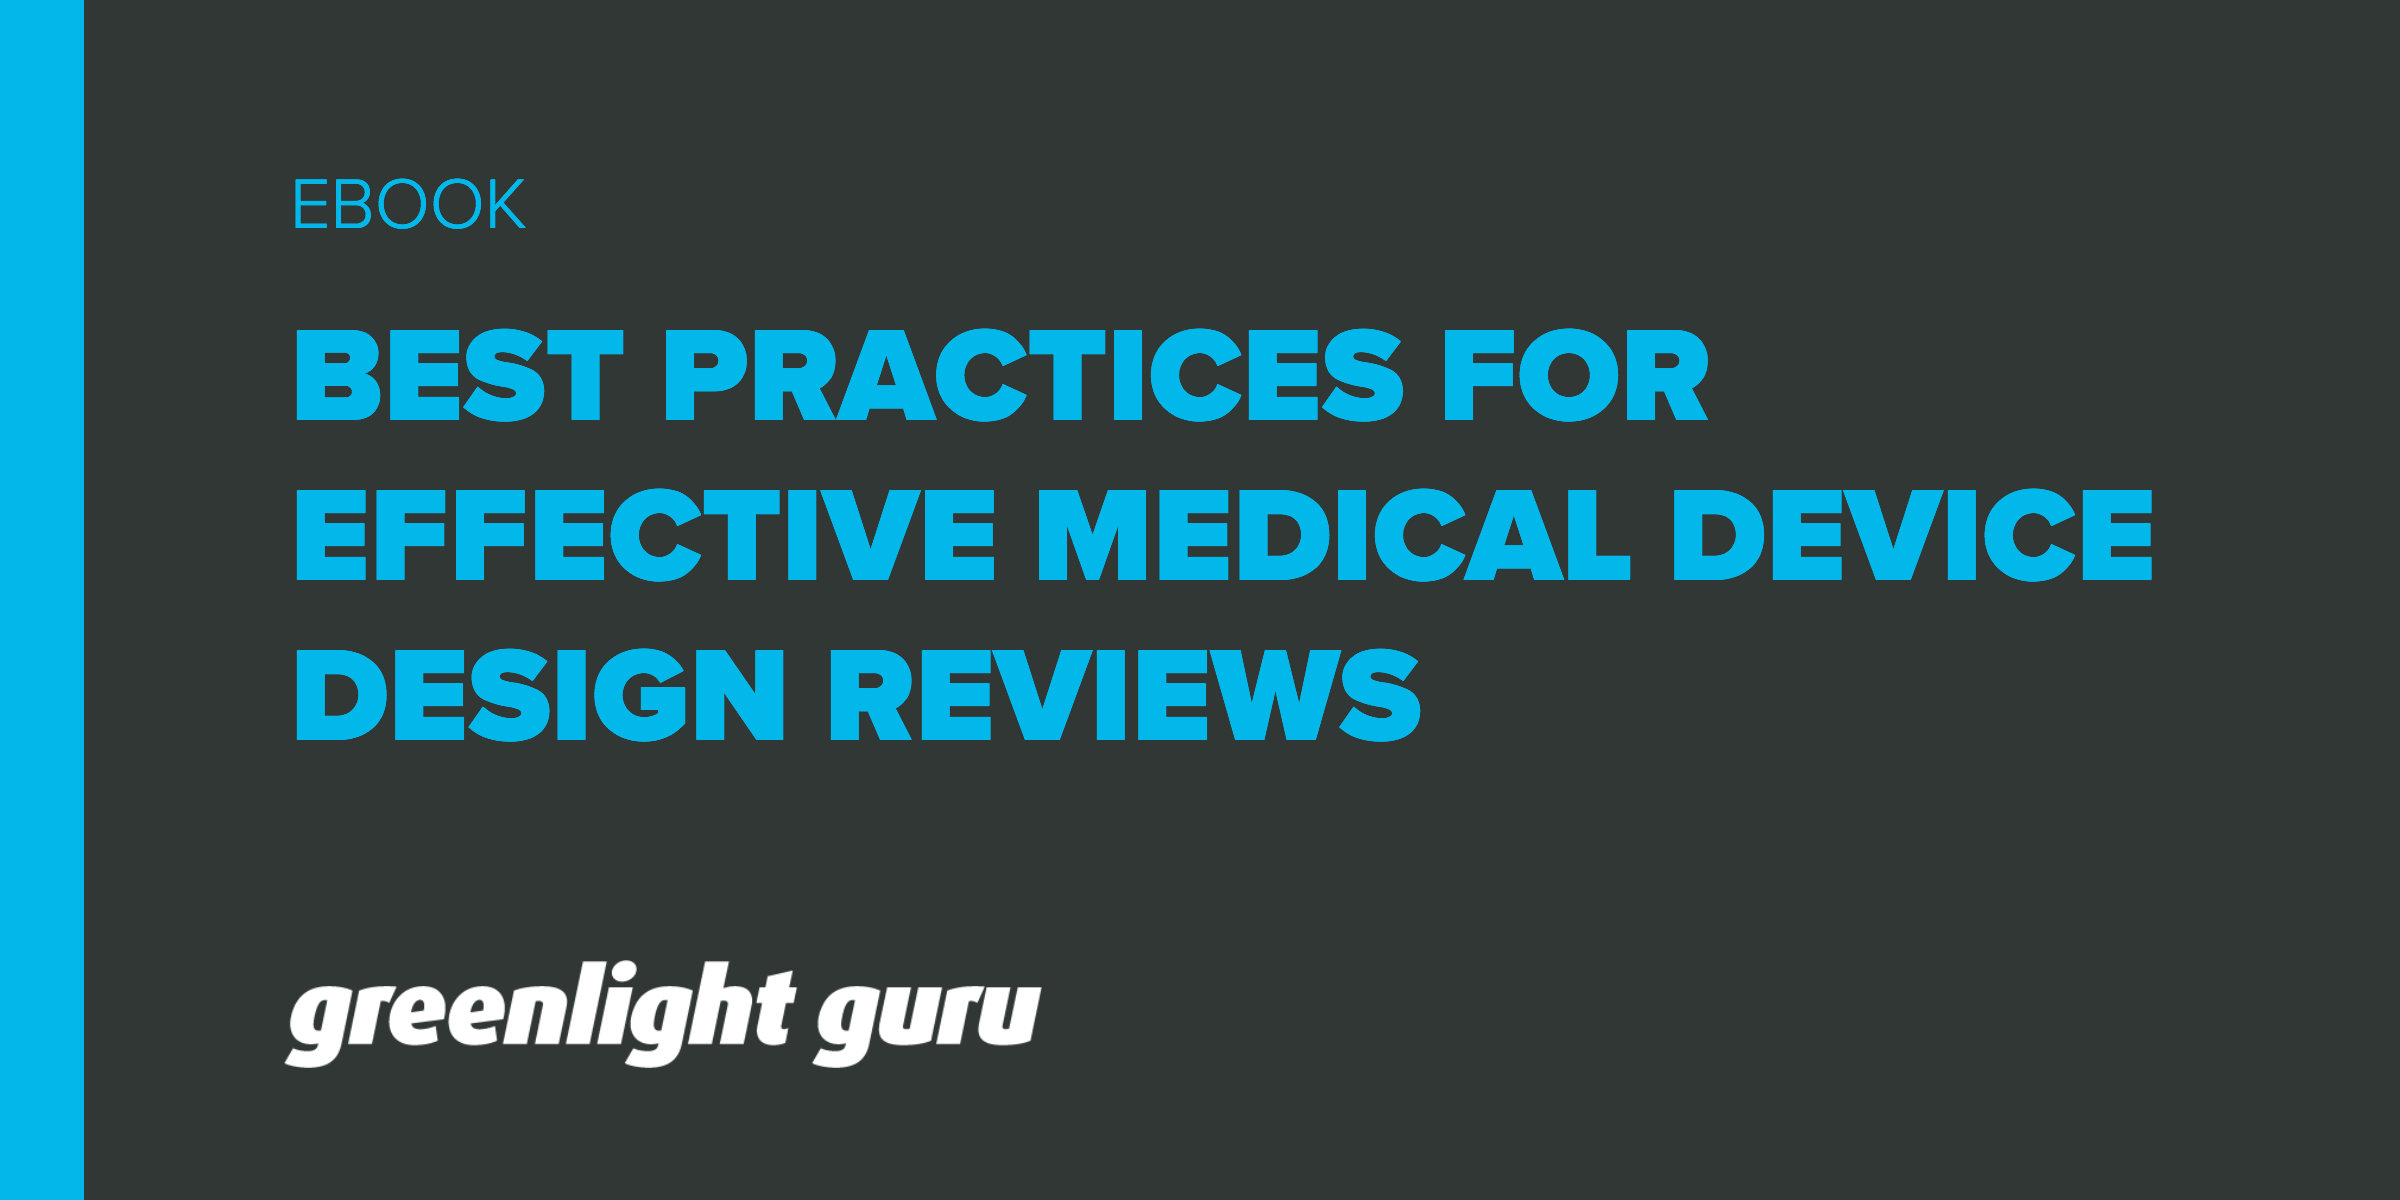 Design Reviews Best Practices for Medical Devices